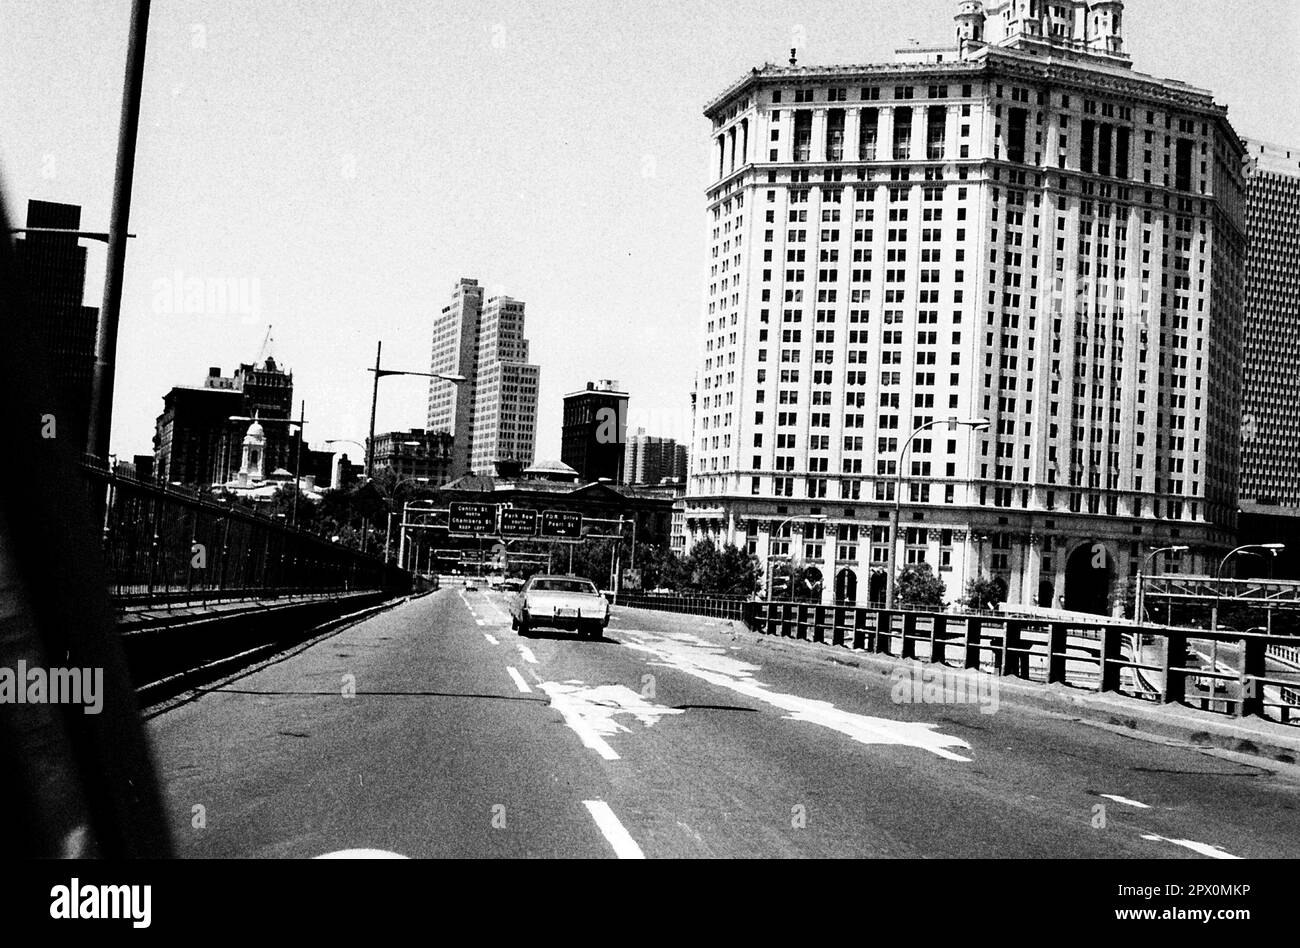 AJAXNETPHOTO. JULY, 1975. NEW YORK, USA. - LOWER MANHATTAN SKYLINE - SEEN FROM BROOKLYN BRIDGE EXIT RAMP HEADING IN TO CITY. ON RIGHT IS THE 40 STORY DAVID N DINKINS MUNICIPAL BUILDING DESIGNED BY MCKIM, MEAD AND WHITE.  PHOTO:JONATHAN EASTLAND/AJAXREF:232404 103 Stock Photo